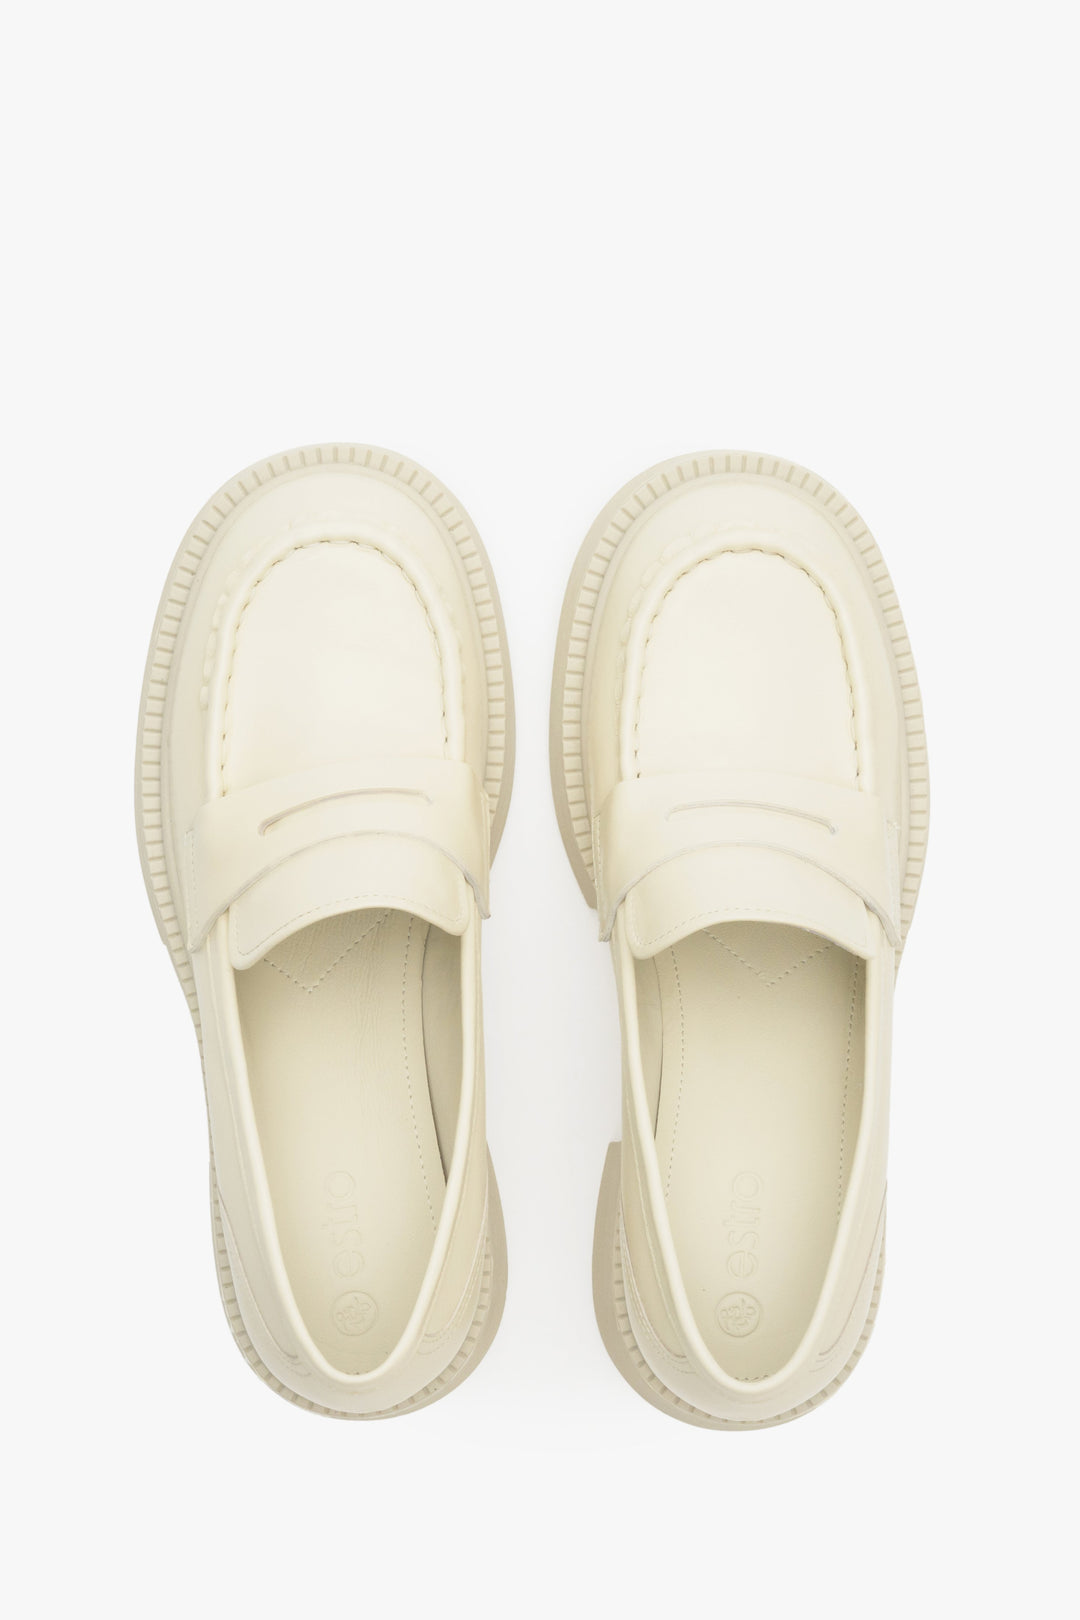 Women's moccasins made of genuine leather in light beige by Estro - close-up on details.